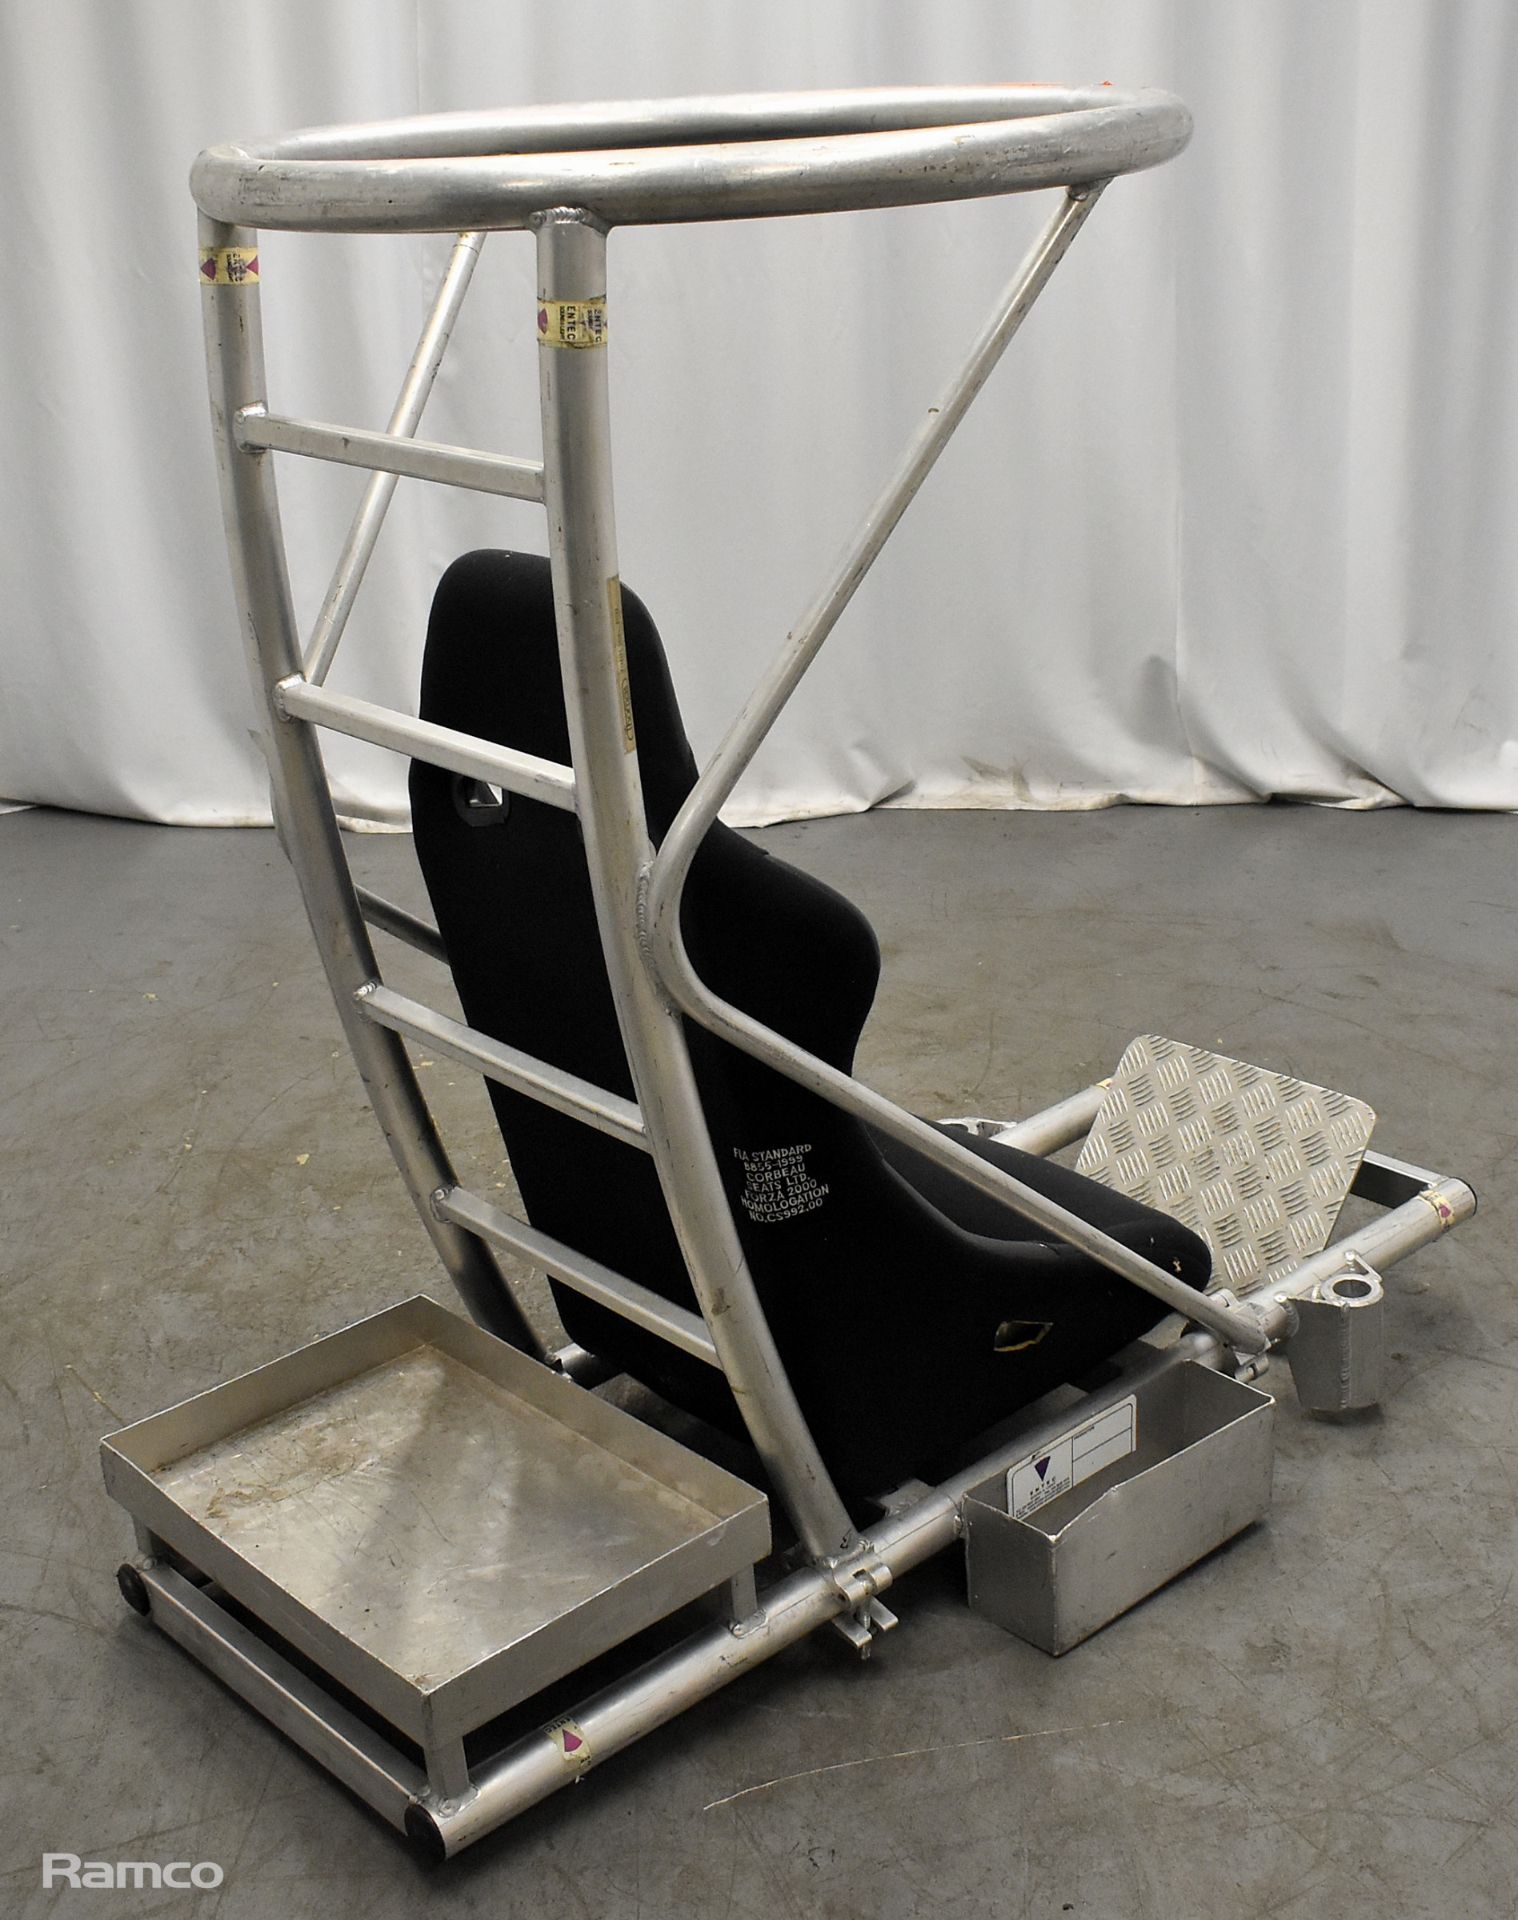 Truss Spot chair frame and bucket seat - Image 2 of 9